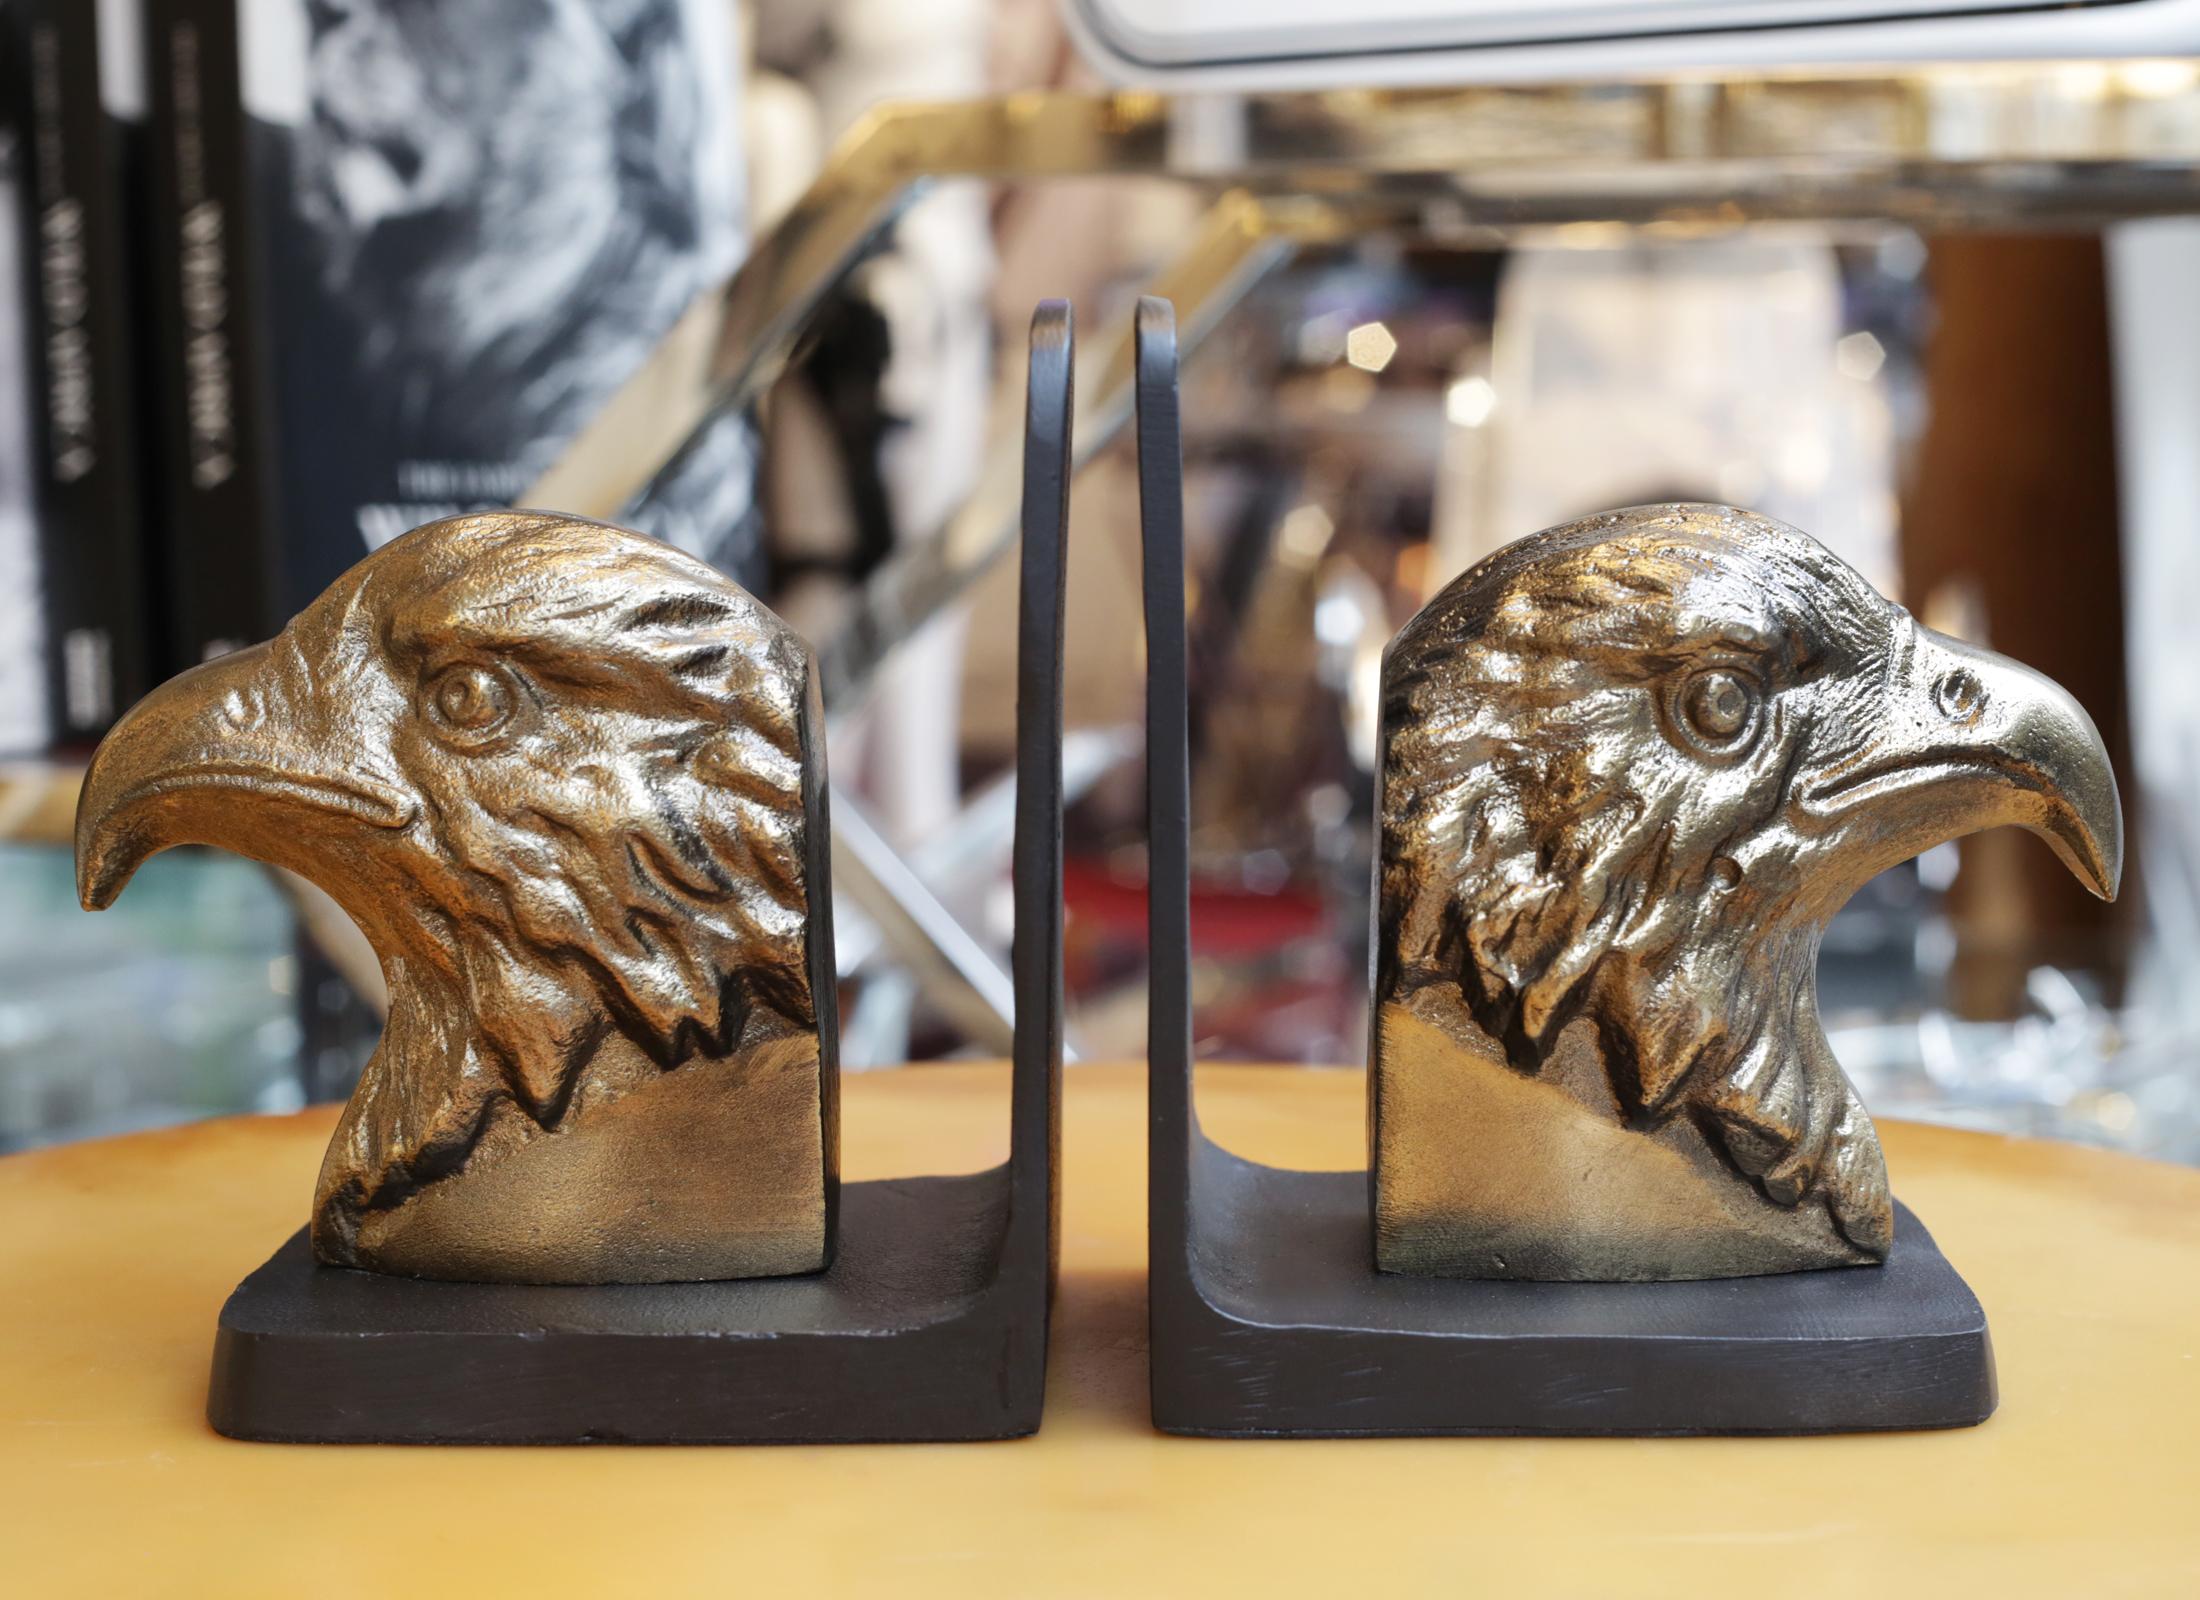 Bookends Eagles set of 2 made in gilt
metal. On blackened metal base.
Measures: L 14 x D 11.5 x H 17.5 cm each.